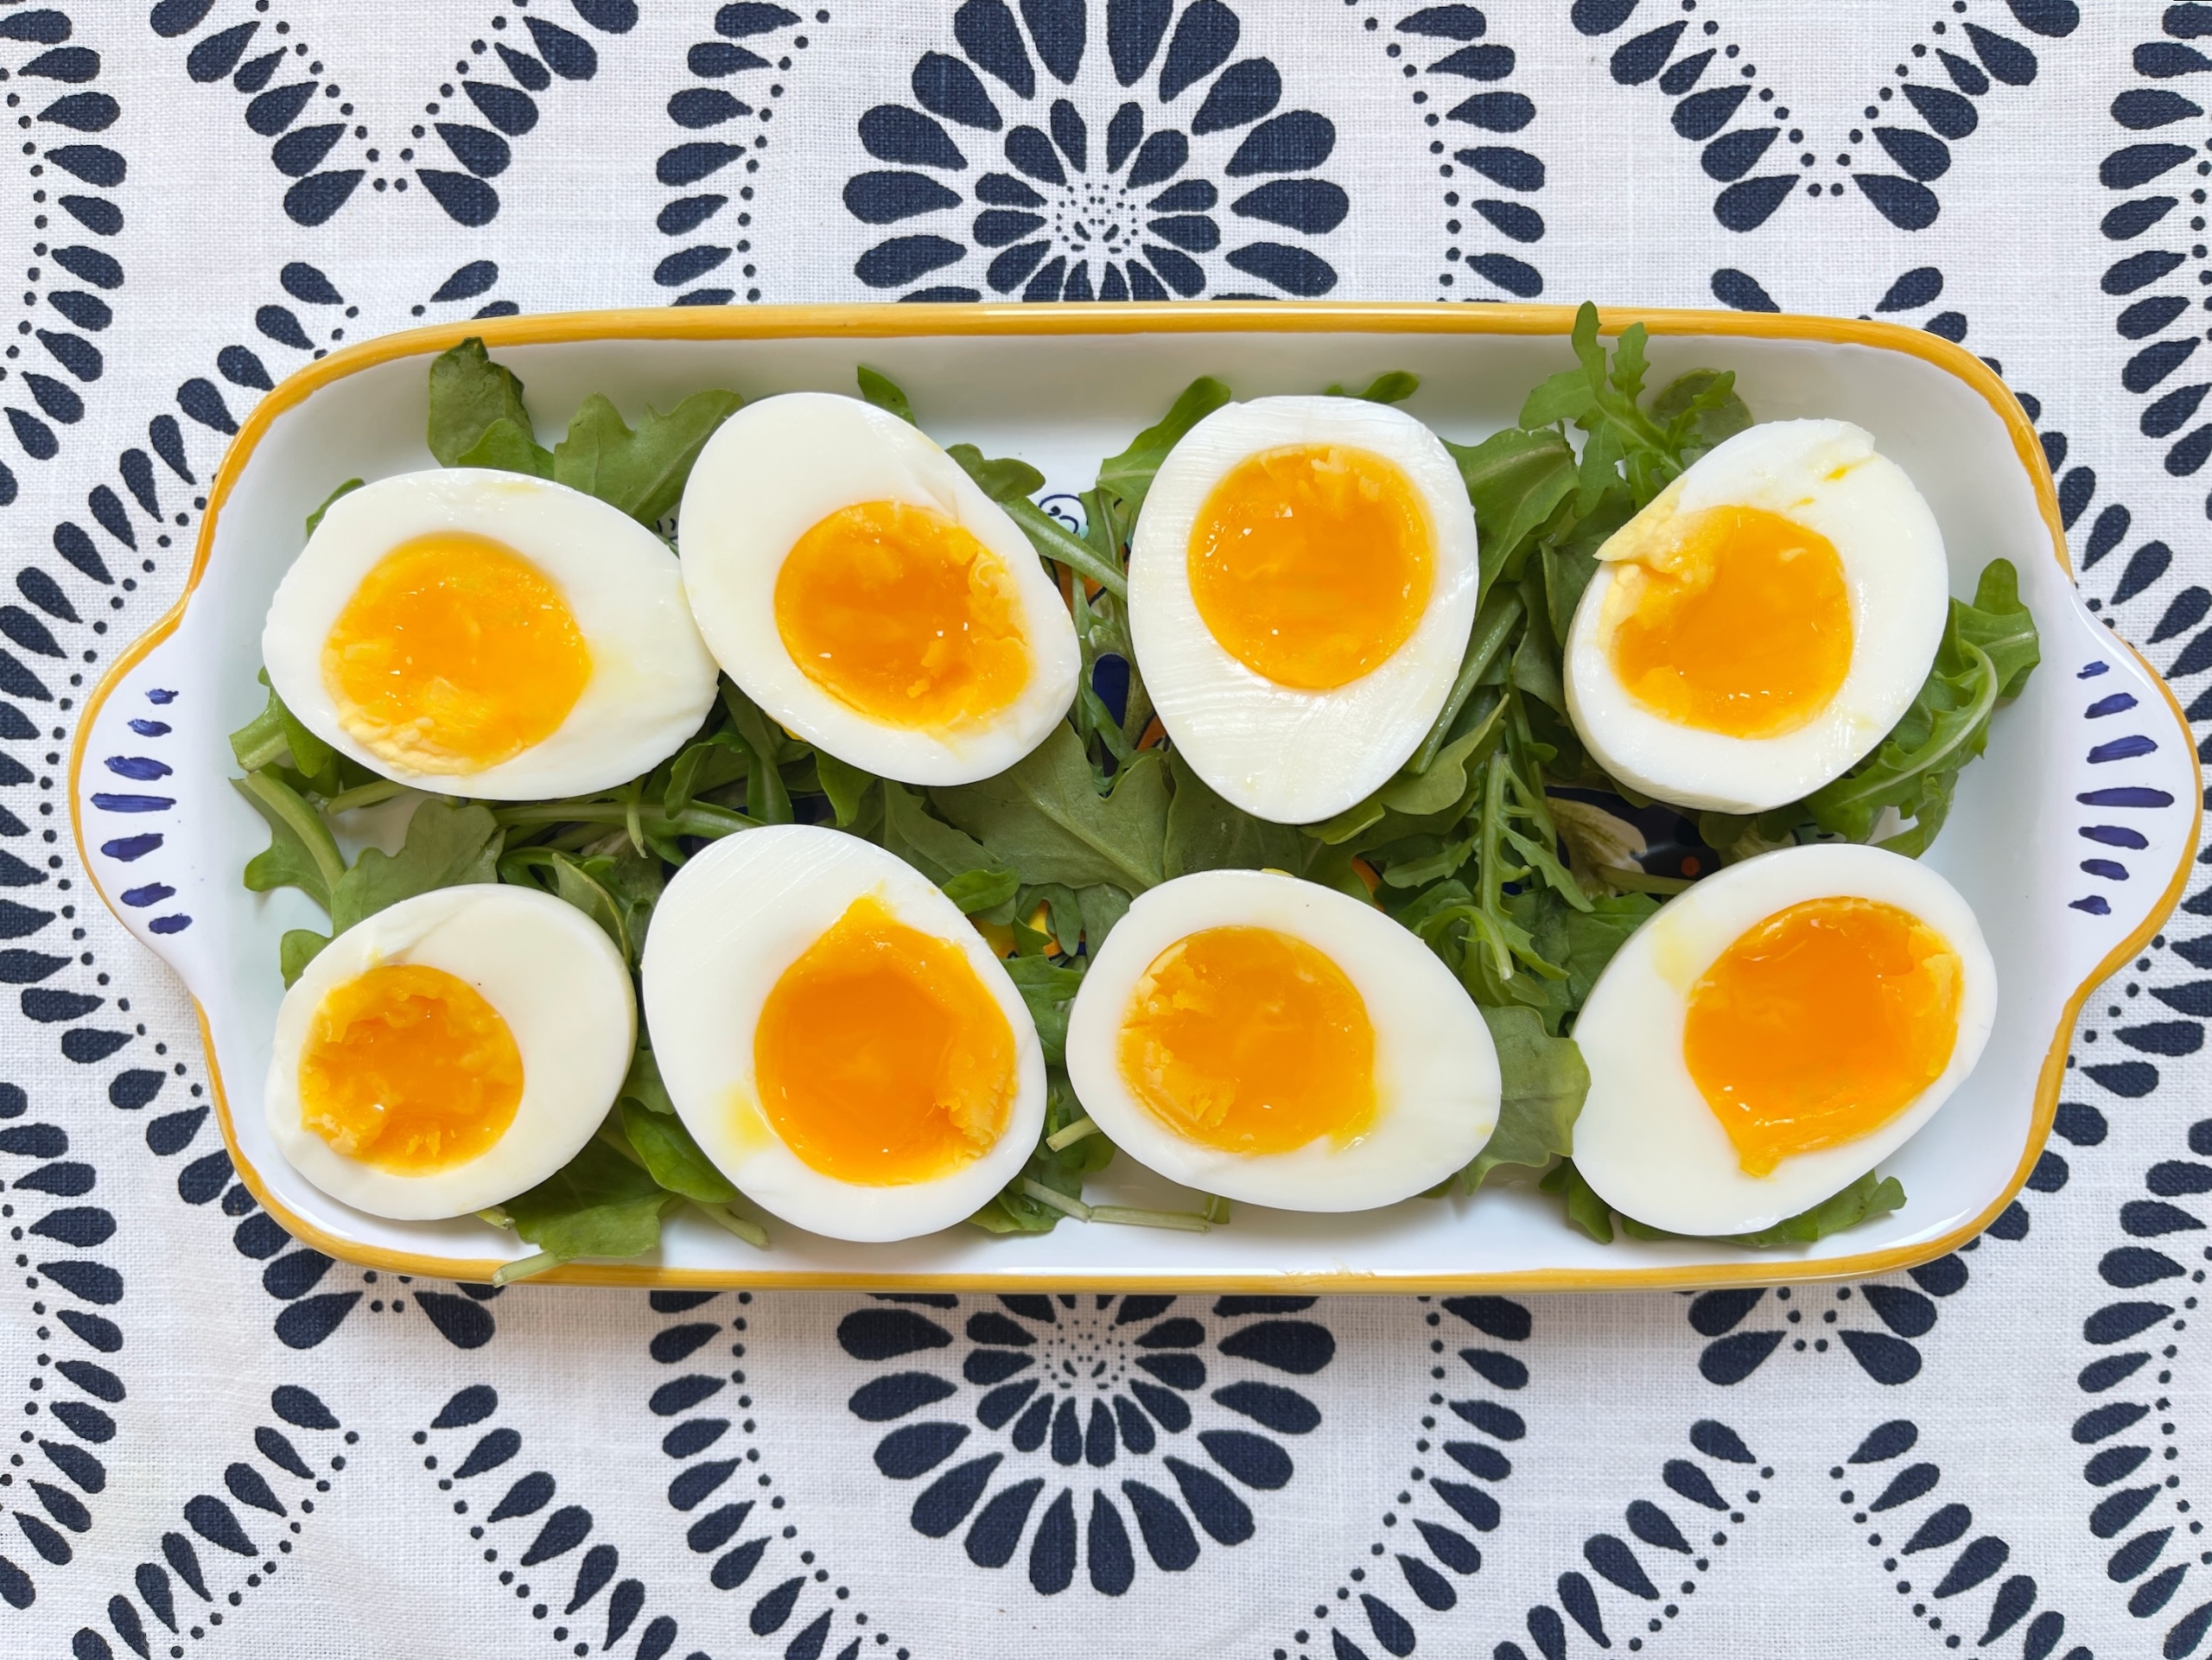 How to Make Perfect Every Time Jammy Soft-Boiled Eggs - Abra's Kitchen